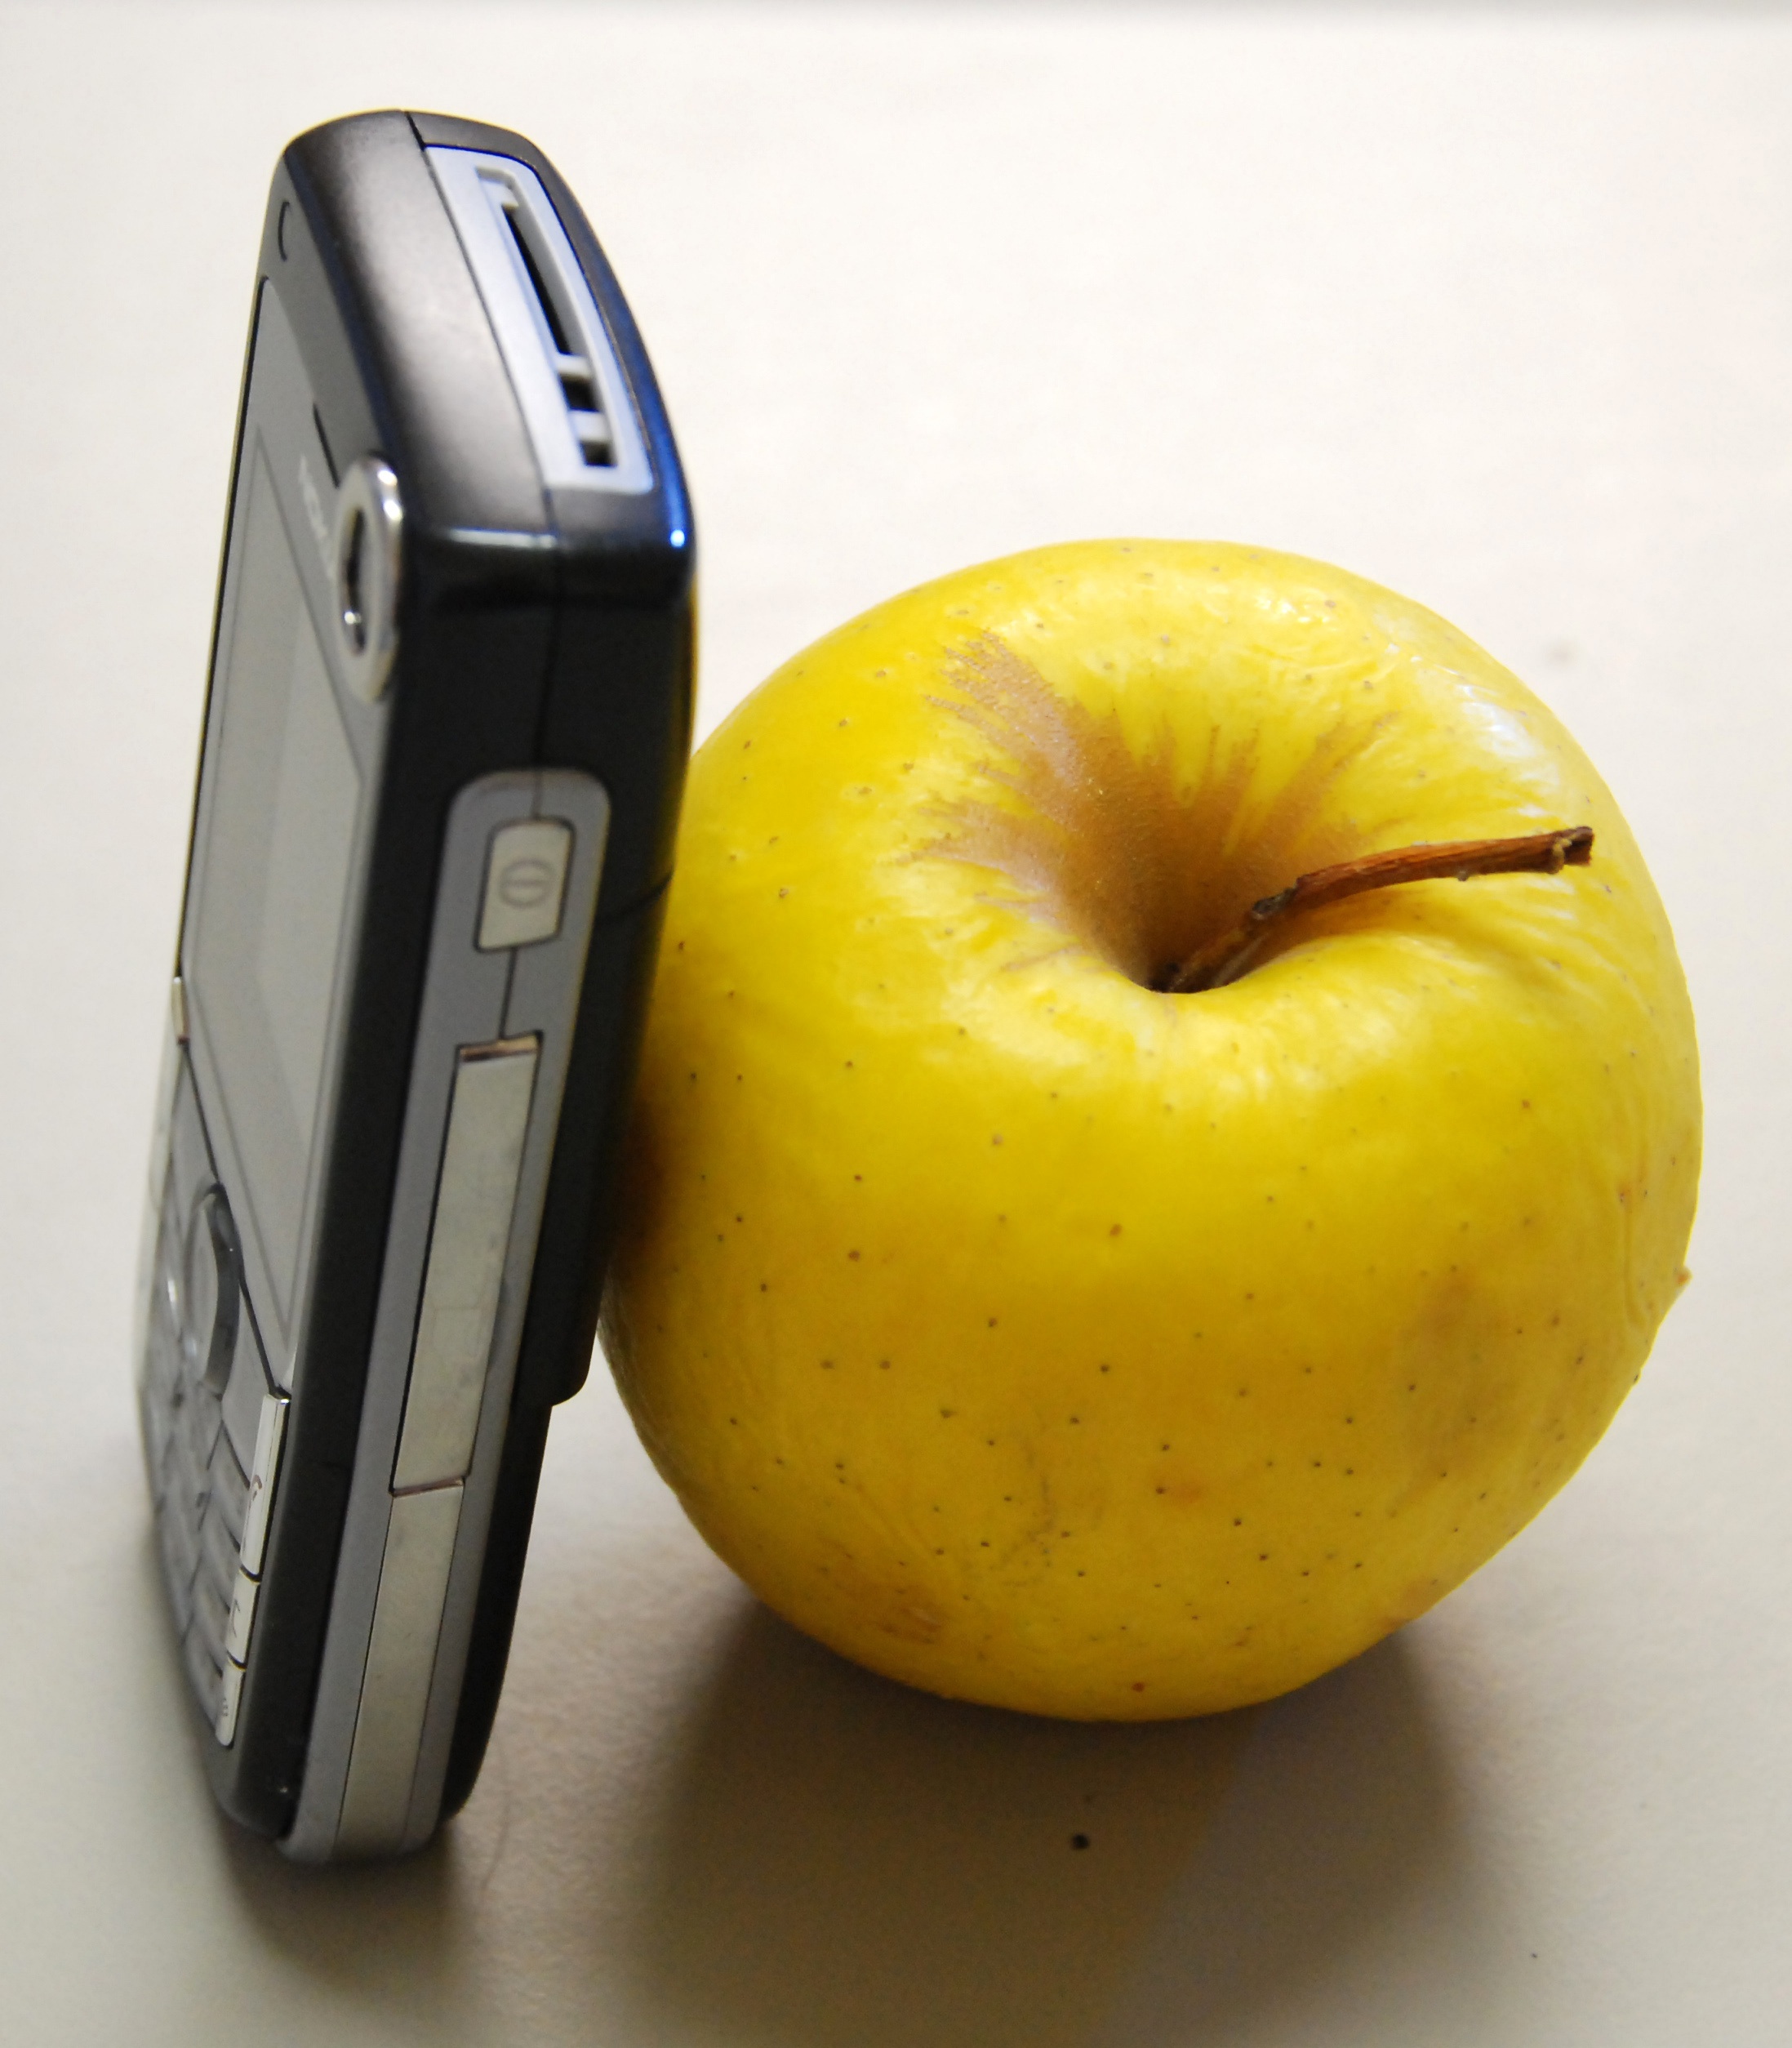 apple with cell phone